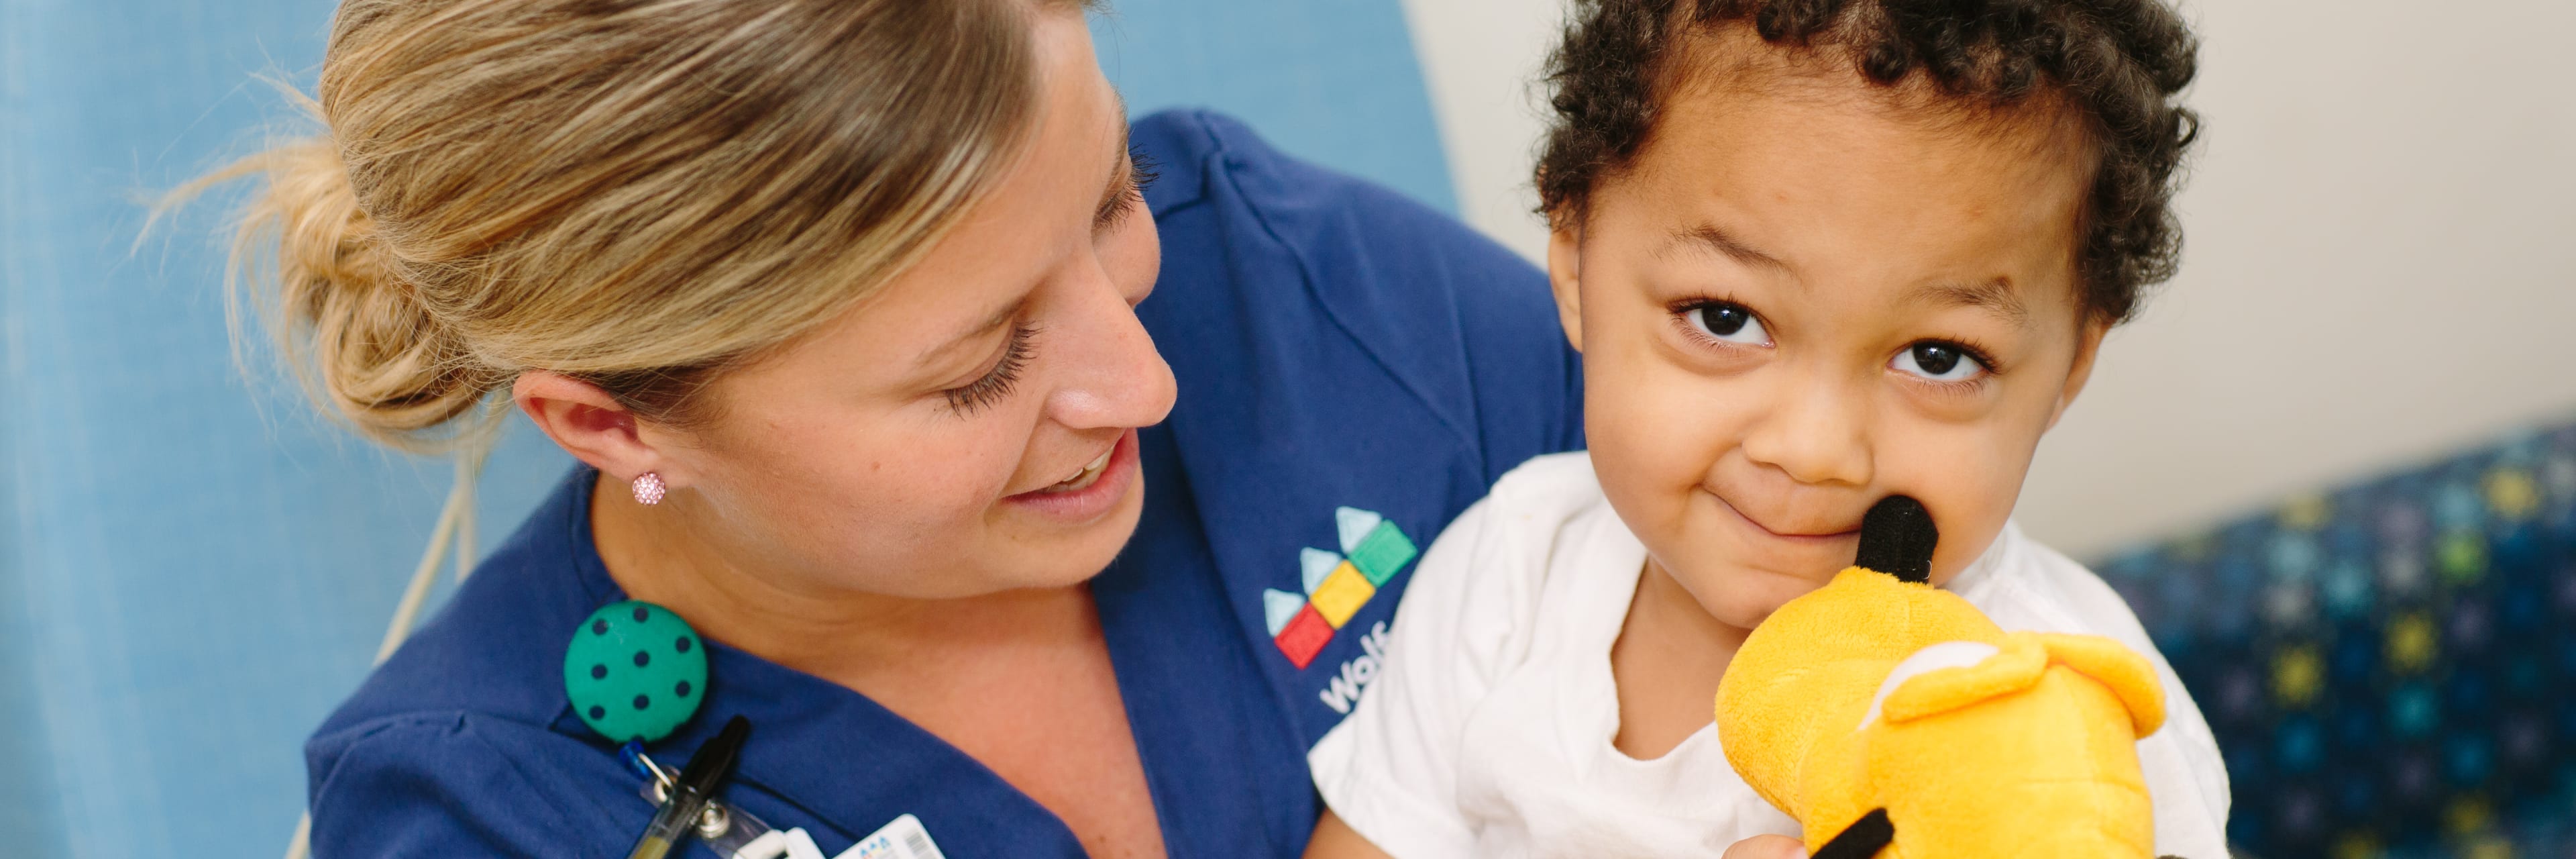 female Wolfson nurse holding a toddler smiling patient on her lap